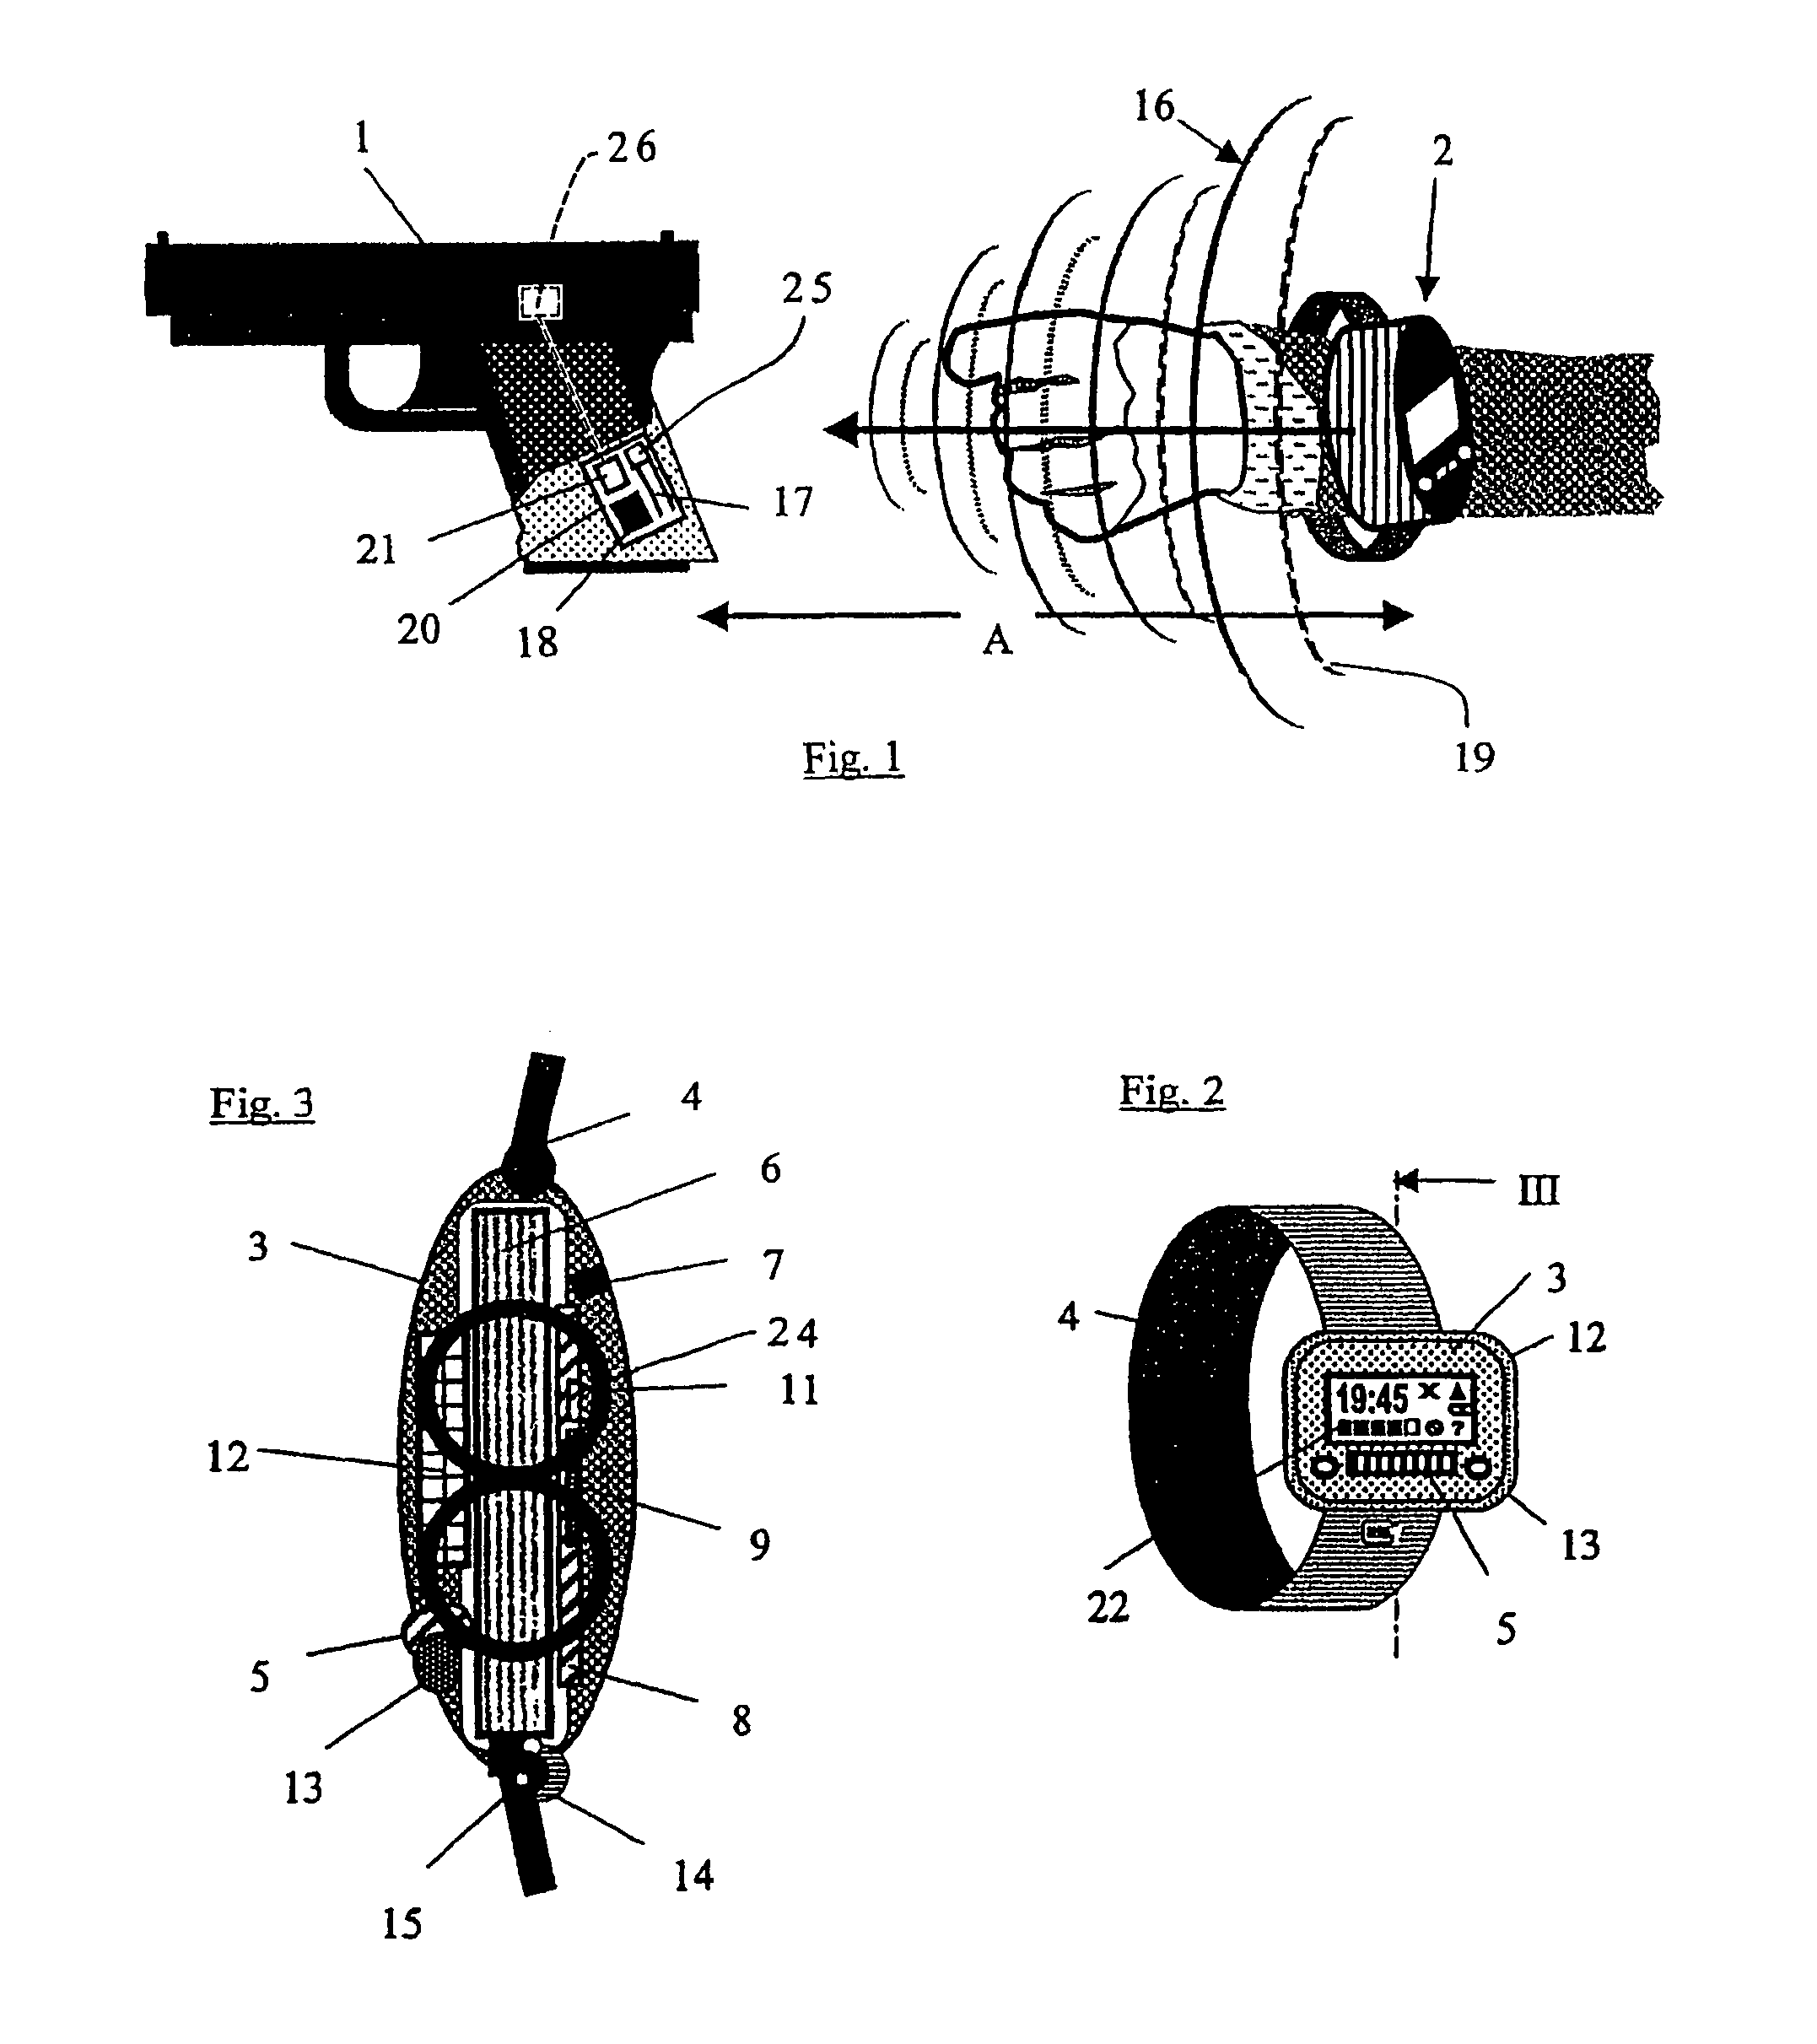 Method for activating a weapon with an identification mechanism